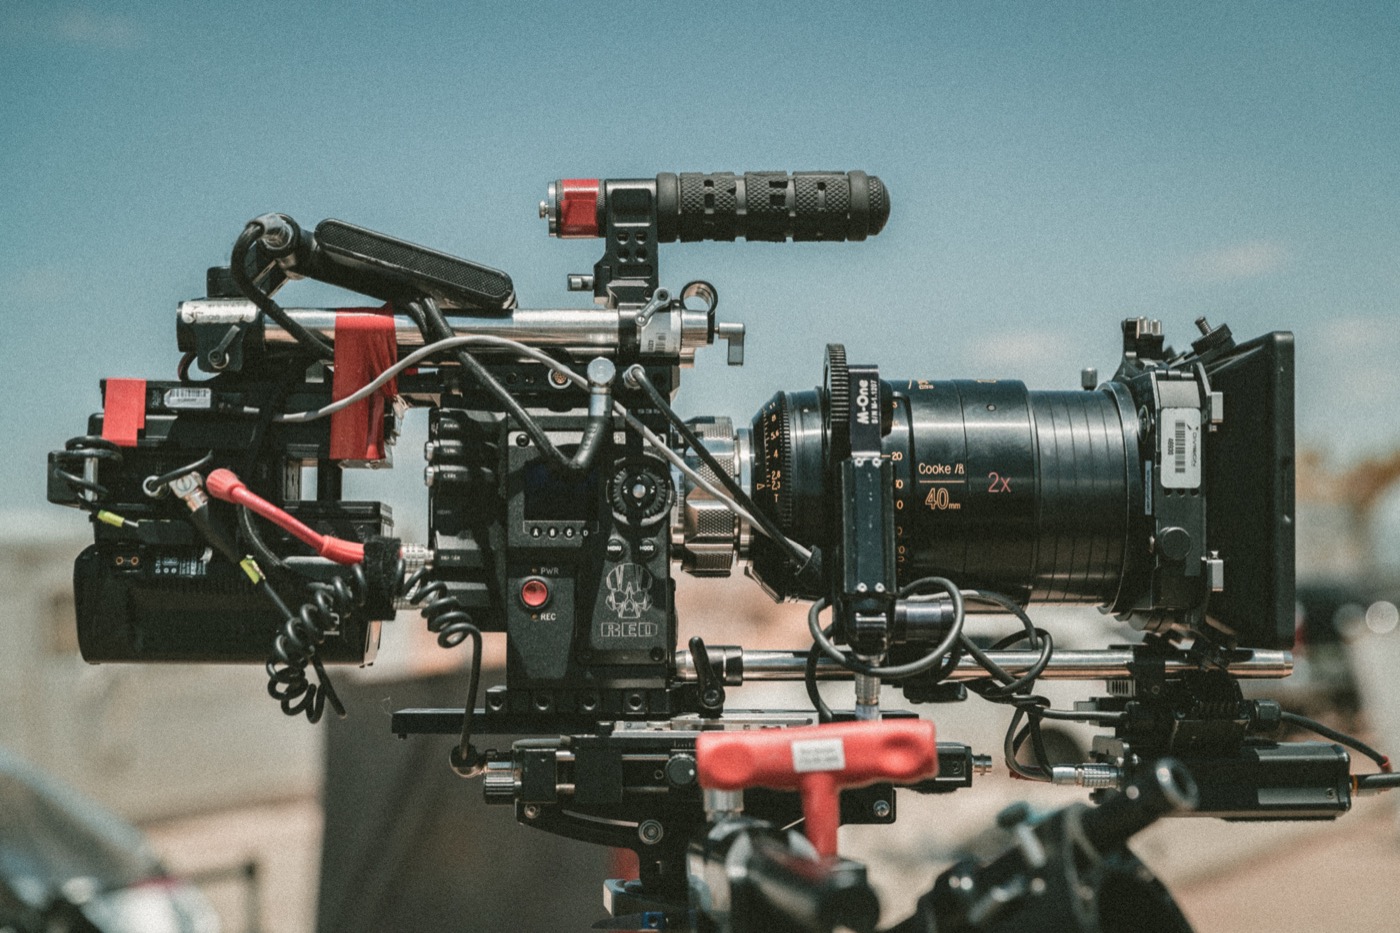 RED workflows - Jakob Owens' RED camera